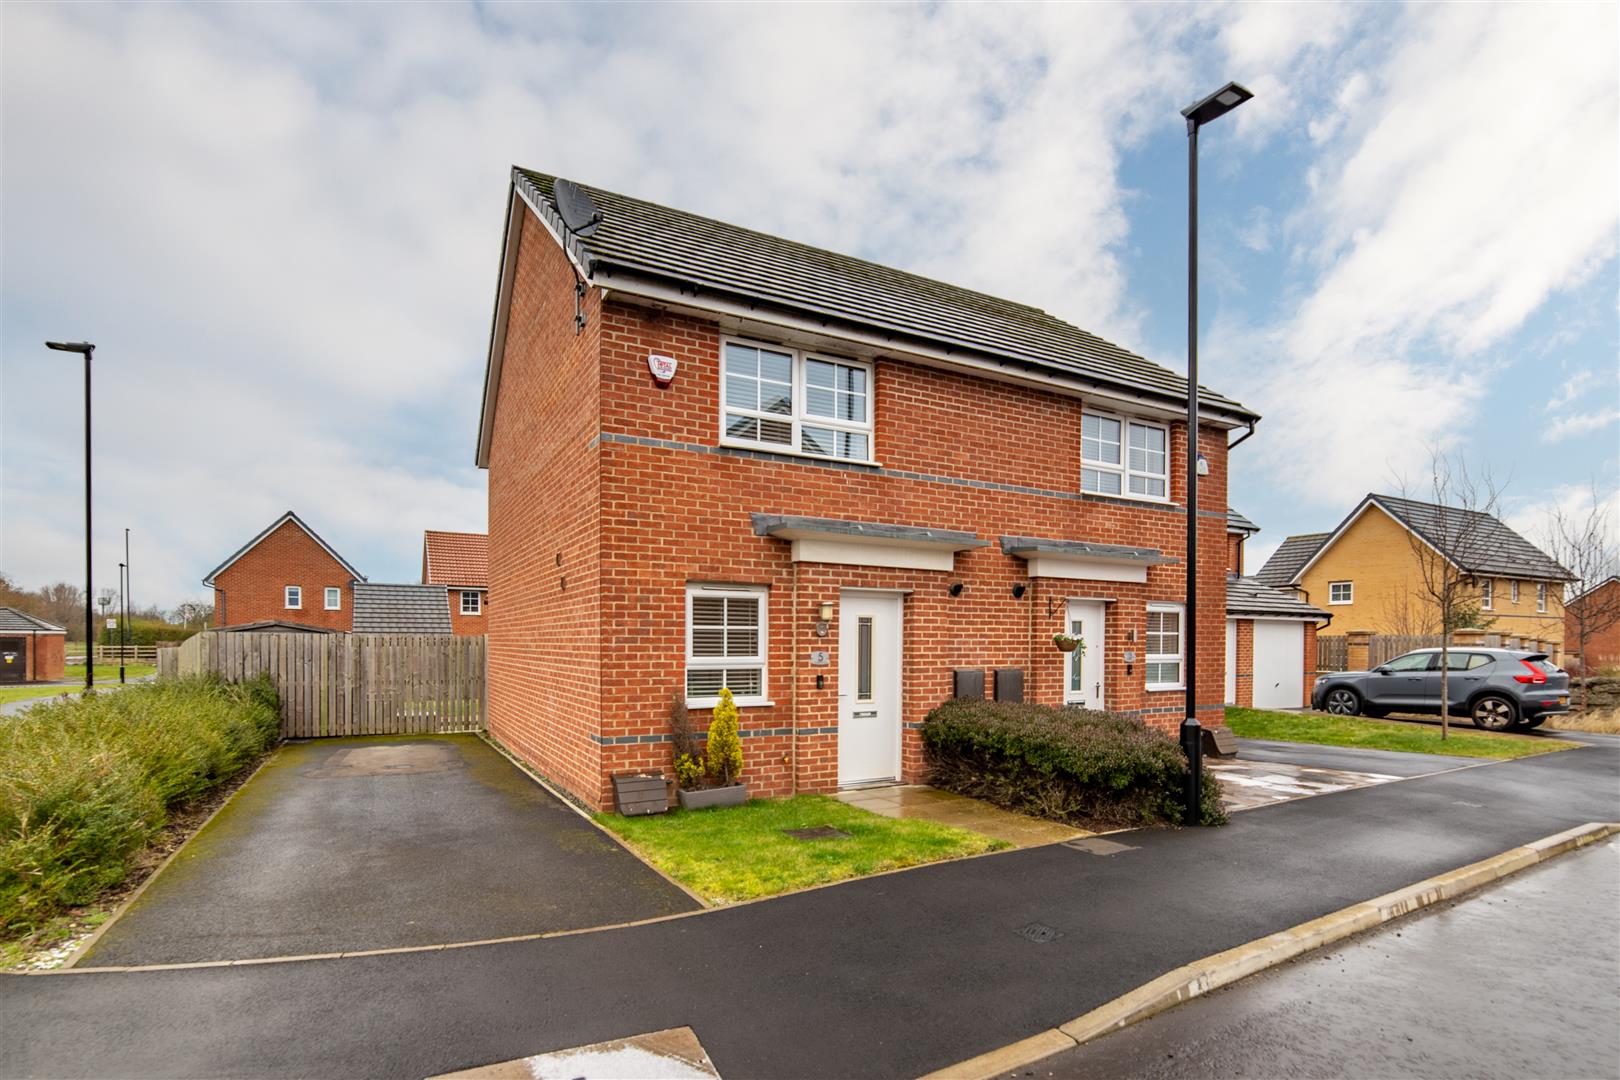 2 bed semi-detached house for sale in Chepstow Close, Newcastle Upon Tyne, NE13